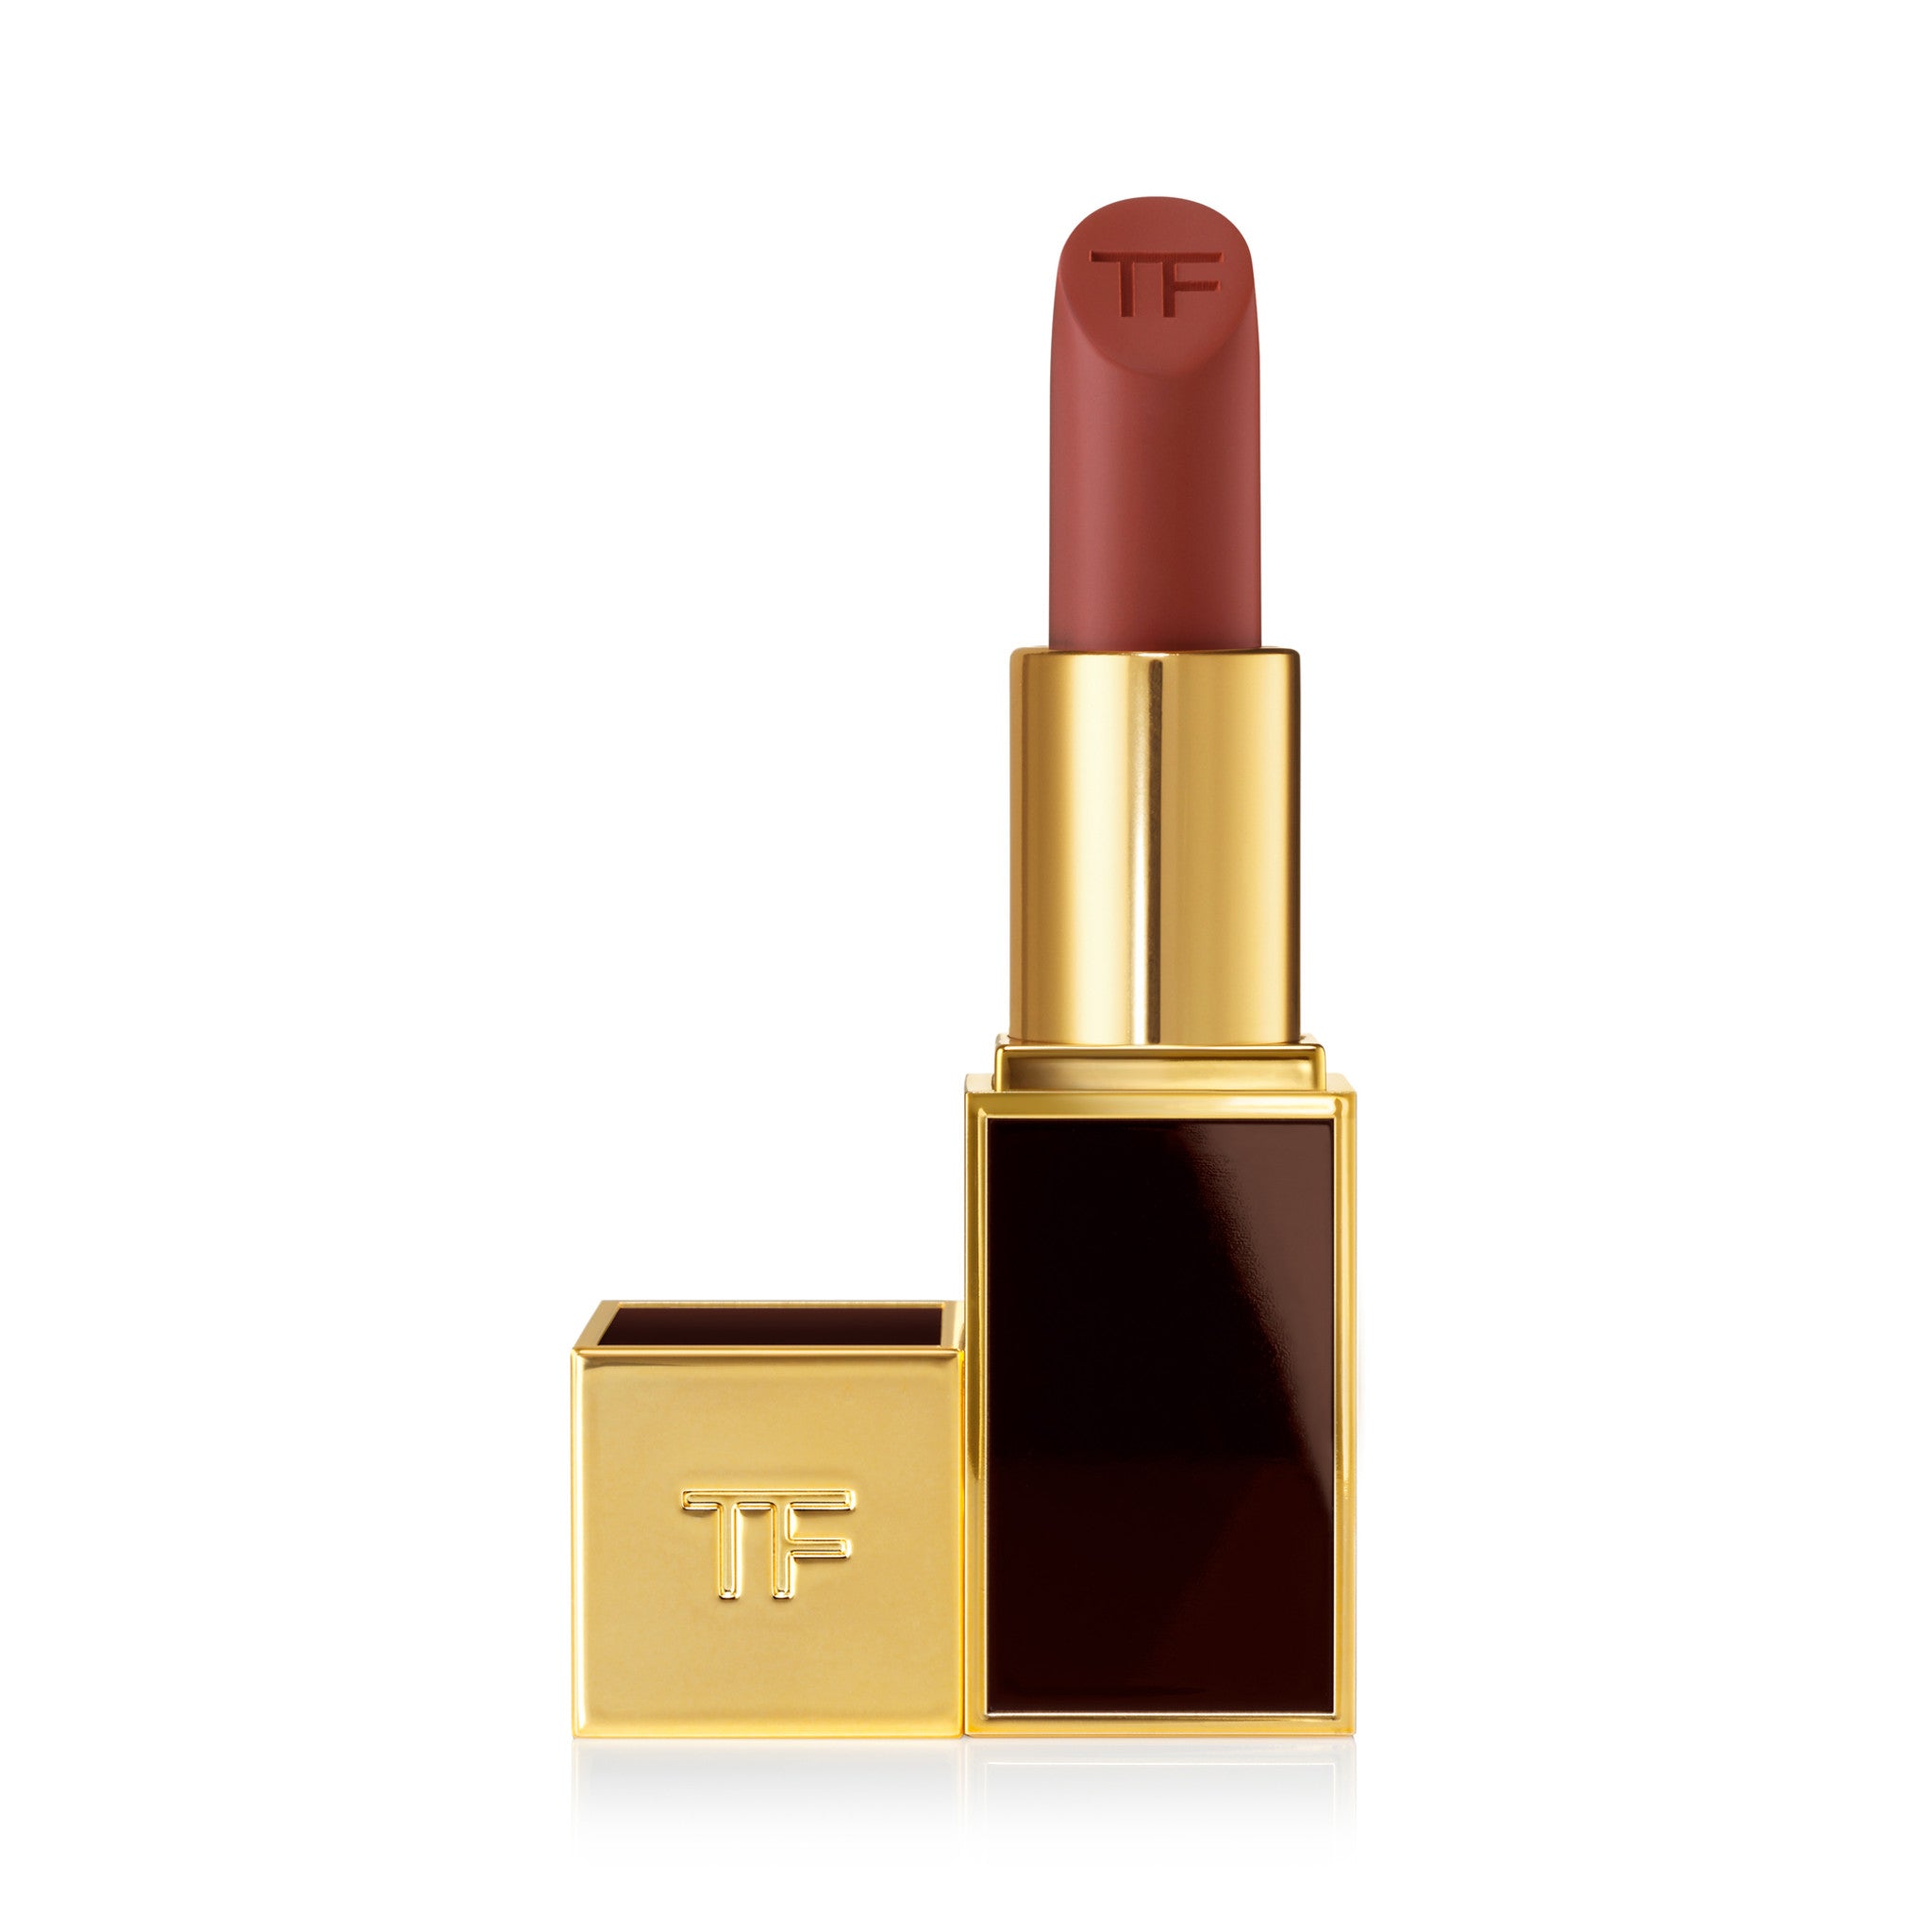 Tom Ford Lip Color Matte Lipstick Color/Shade variant: 100 100 main image. This product is in the color red